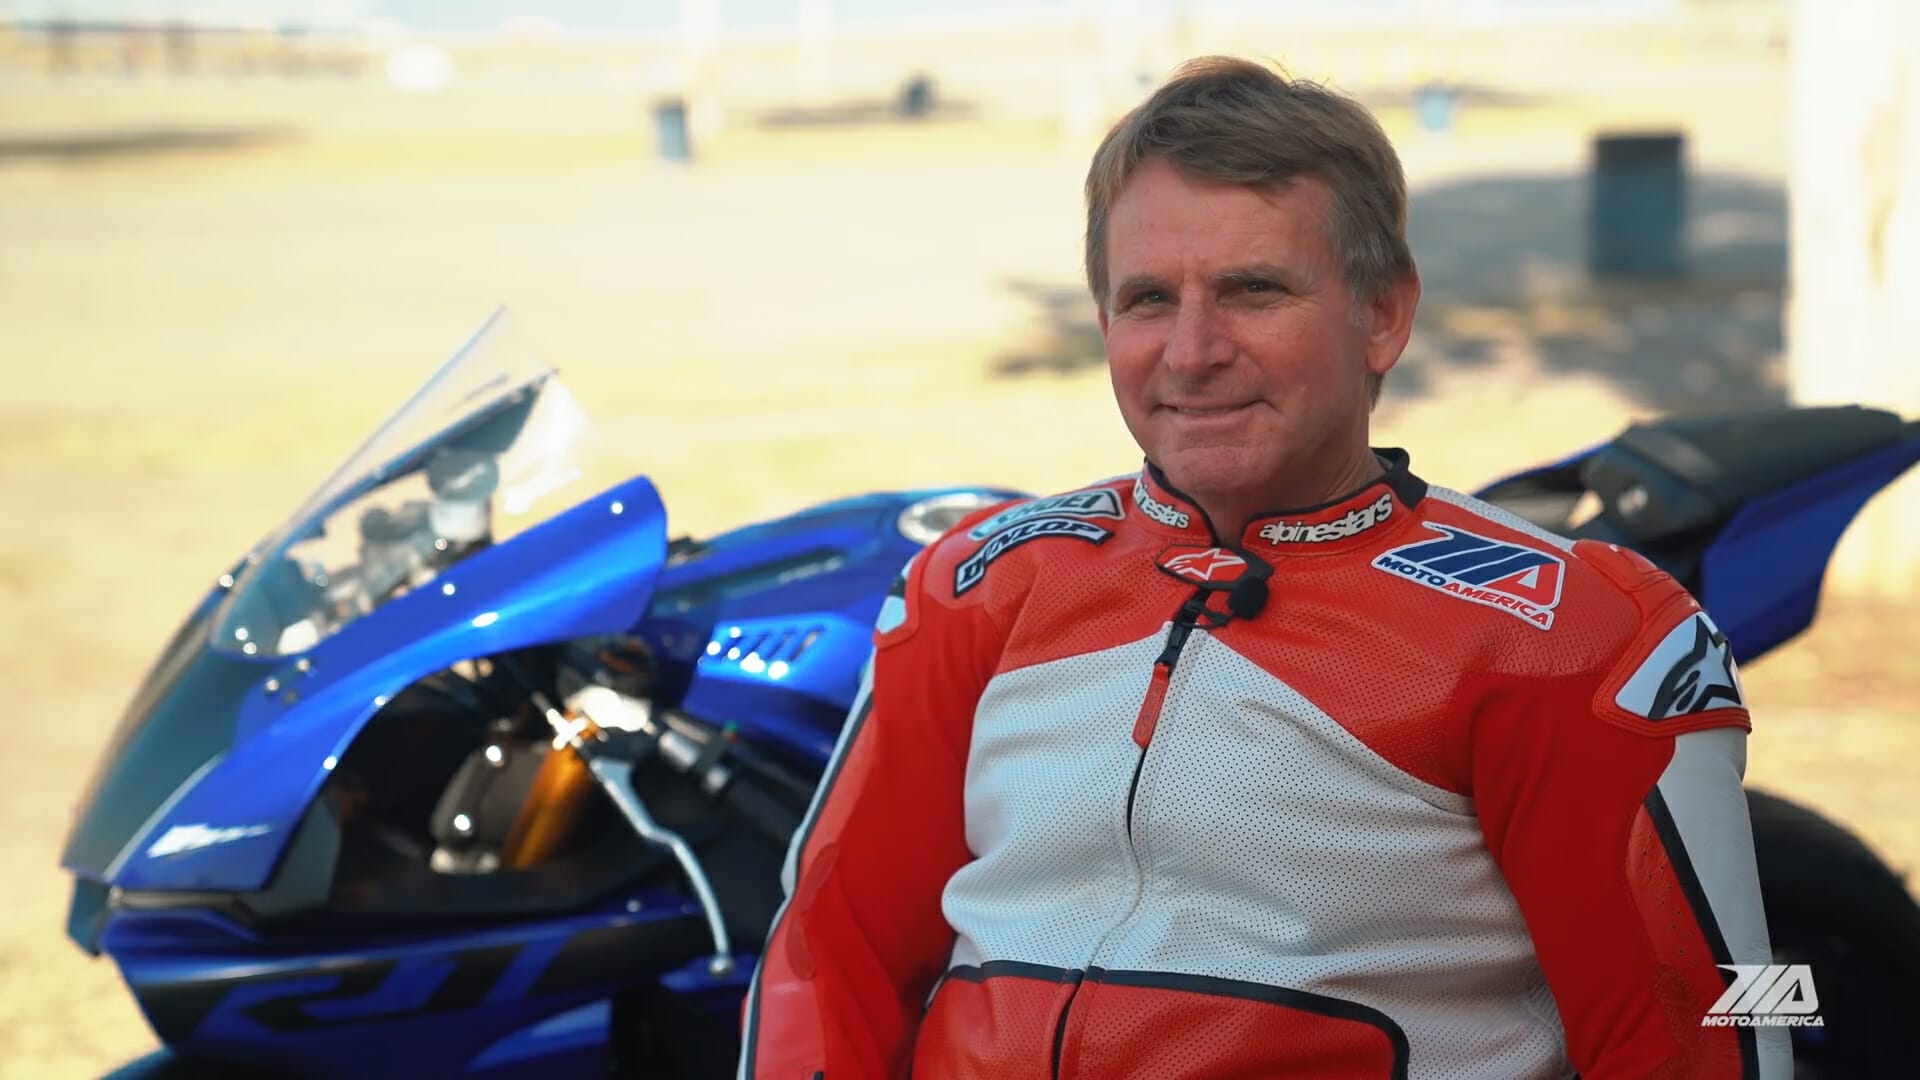 #WayneRainey, back on the #motorcycle after 26 years
- also in the app Motorcycle News